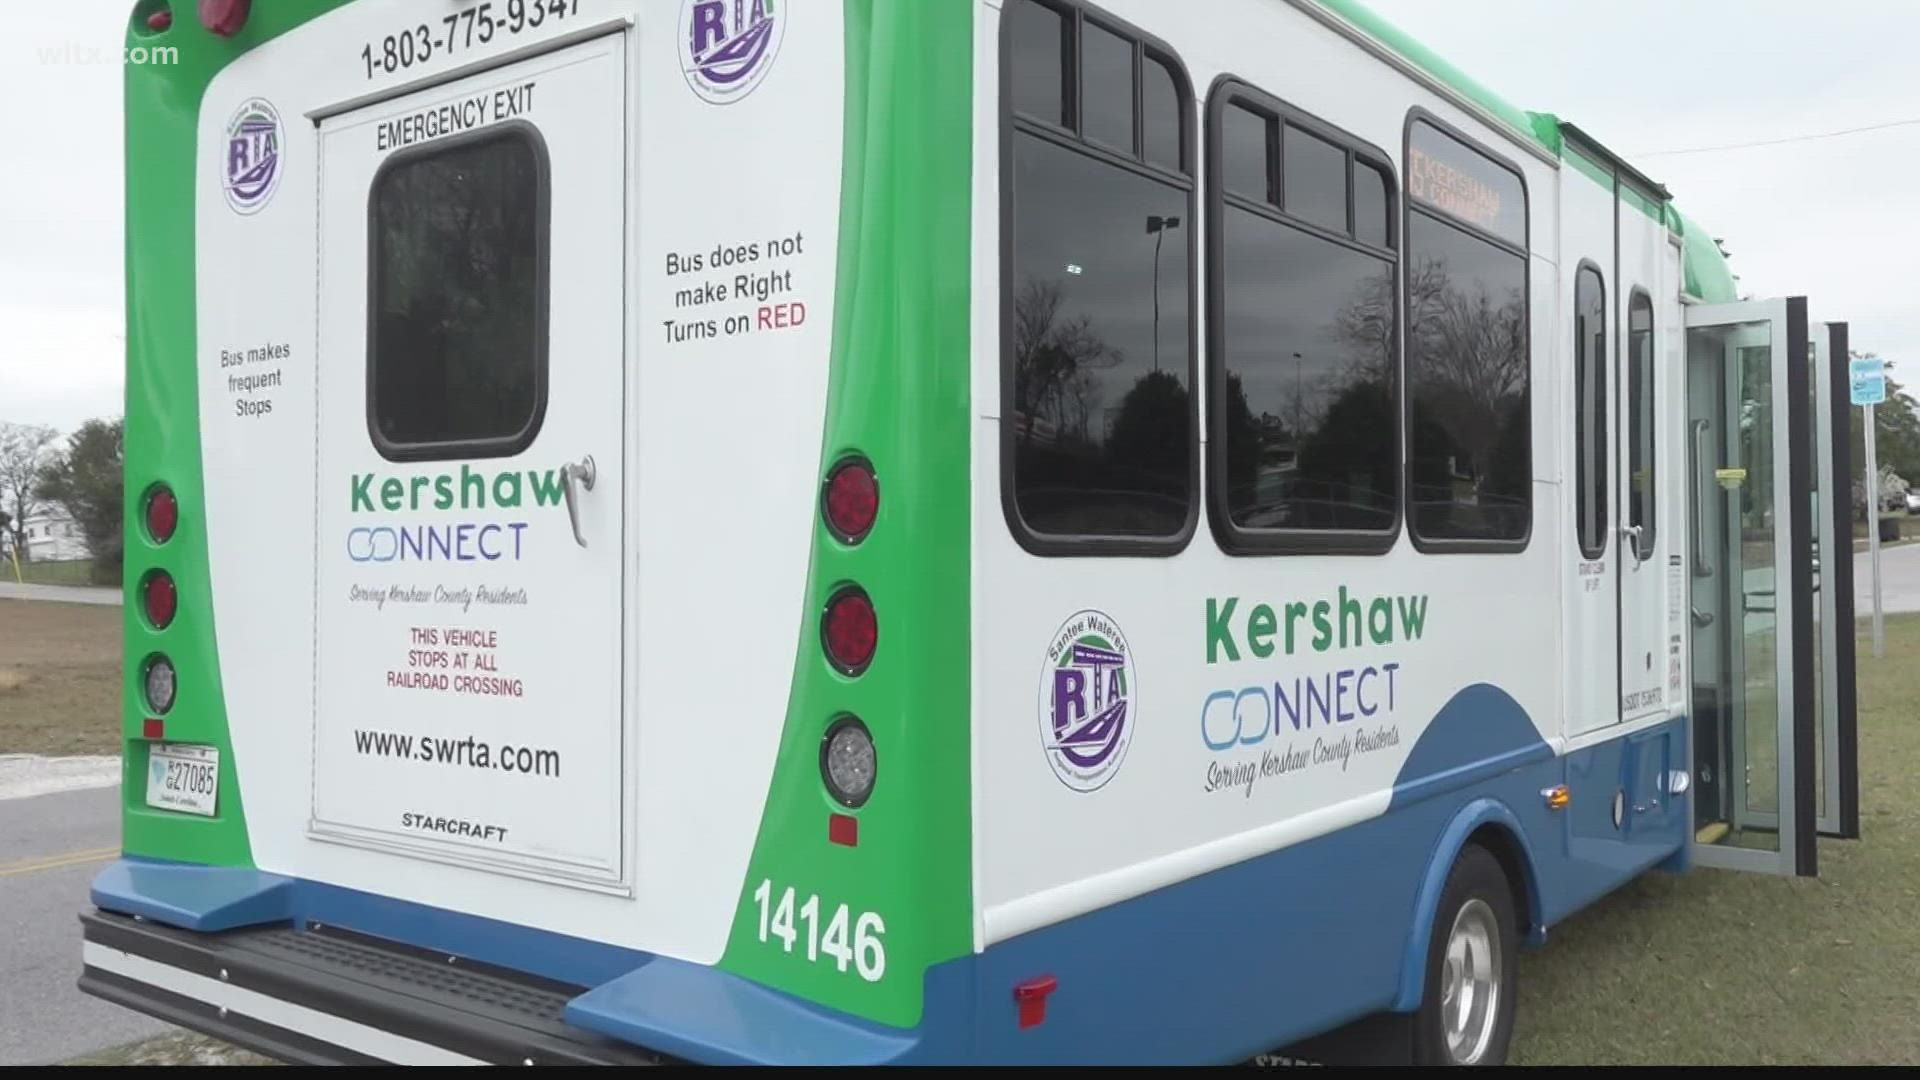 The Santee Wateree Regional Transportation Authority (SWRTA) is now offering free rides on Fridays in Lee, Kershaw, and Sumter counties.